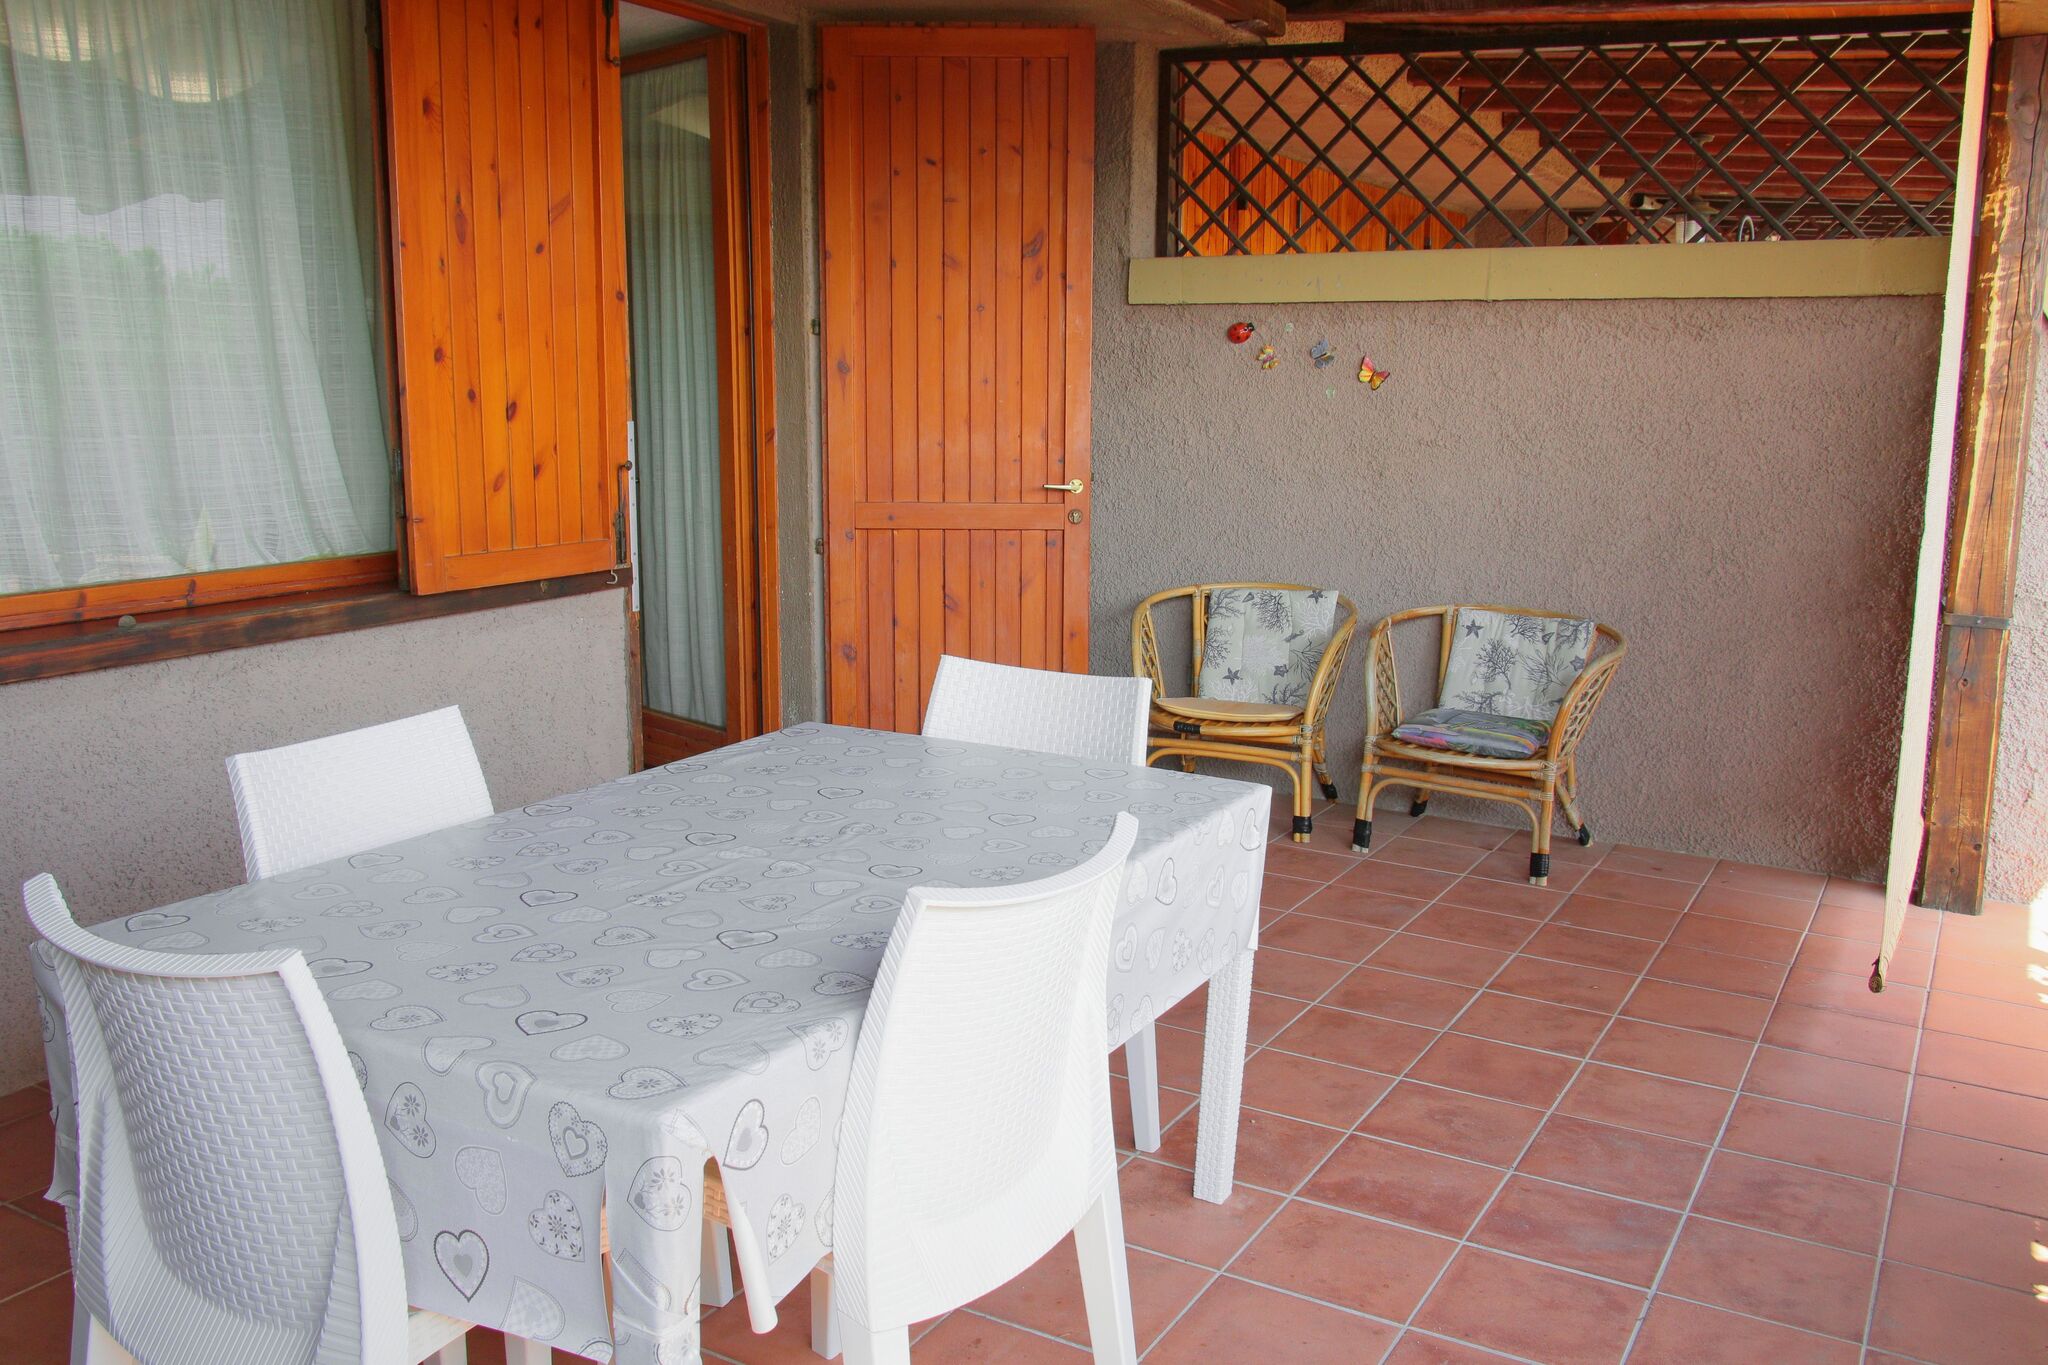 Appealing apartment in Olbia with garden